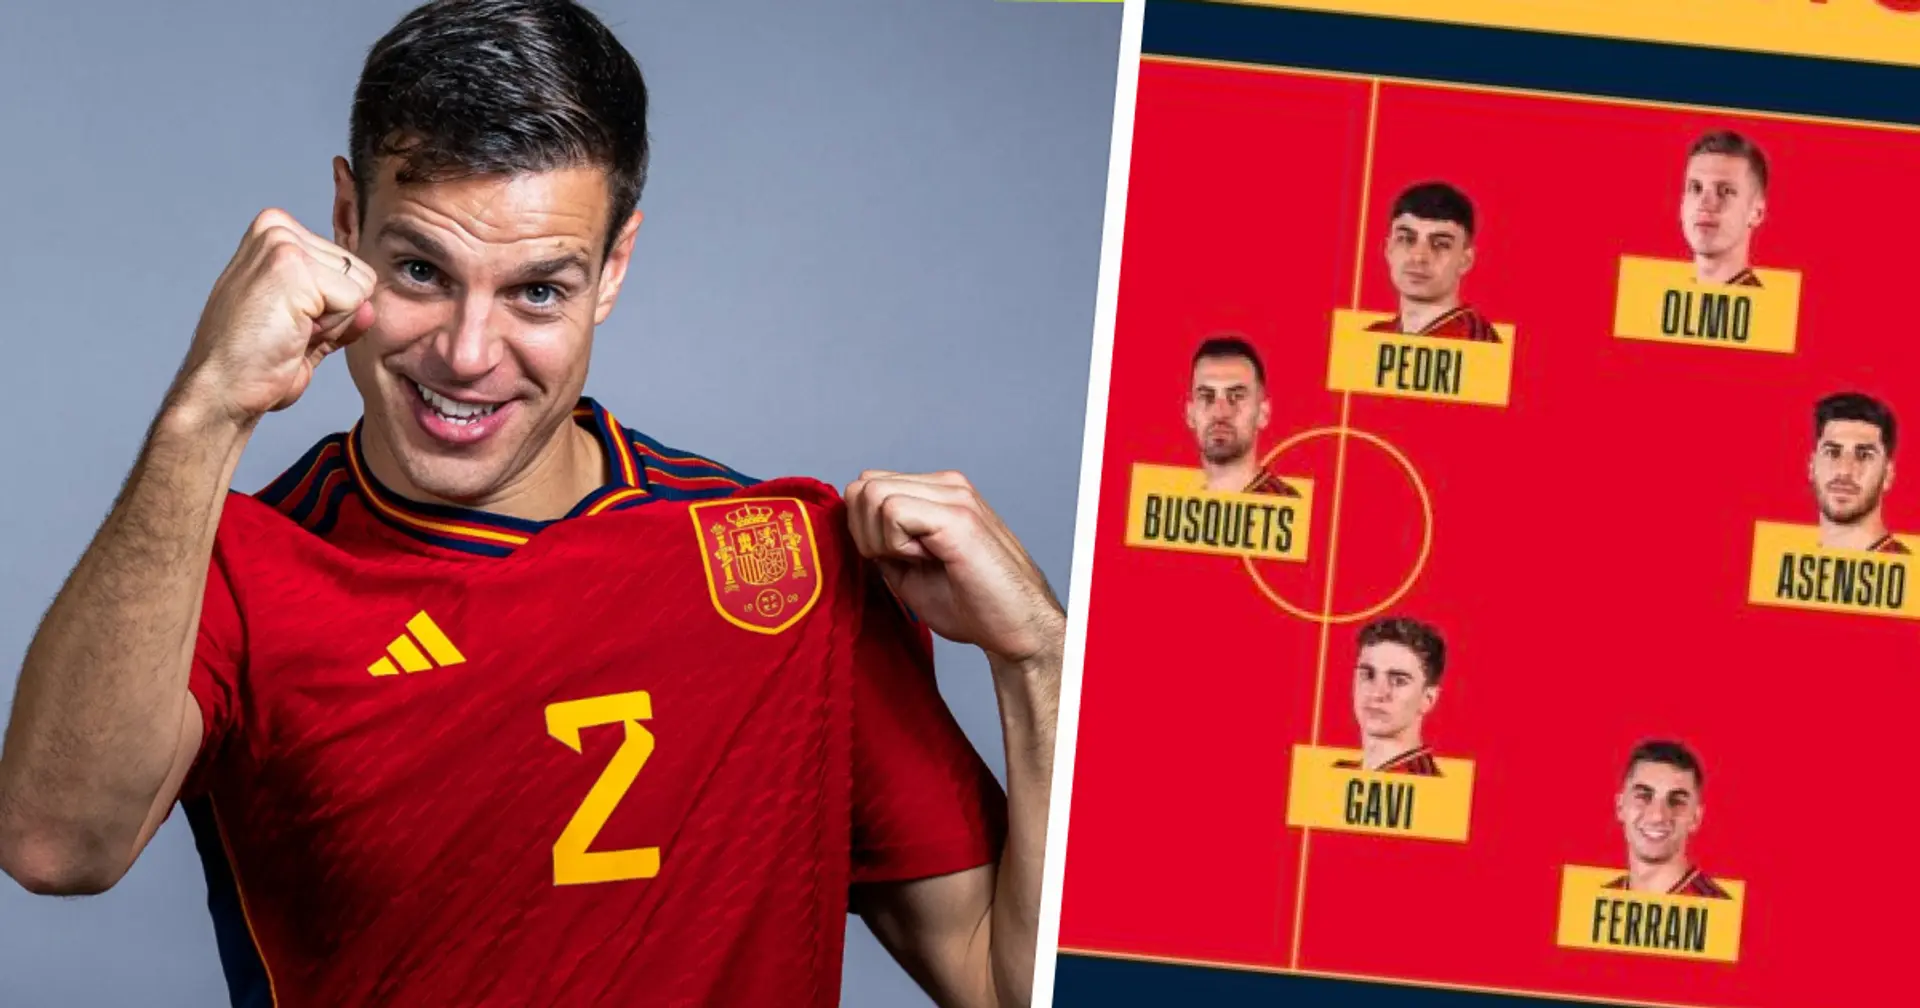 Chelsea captain Azpilicueta starts for Spain at World Cup